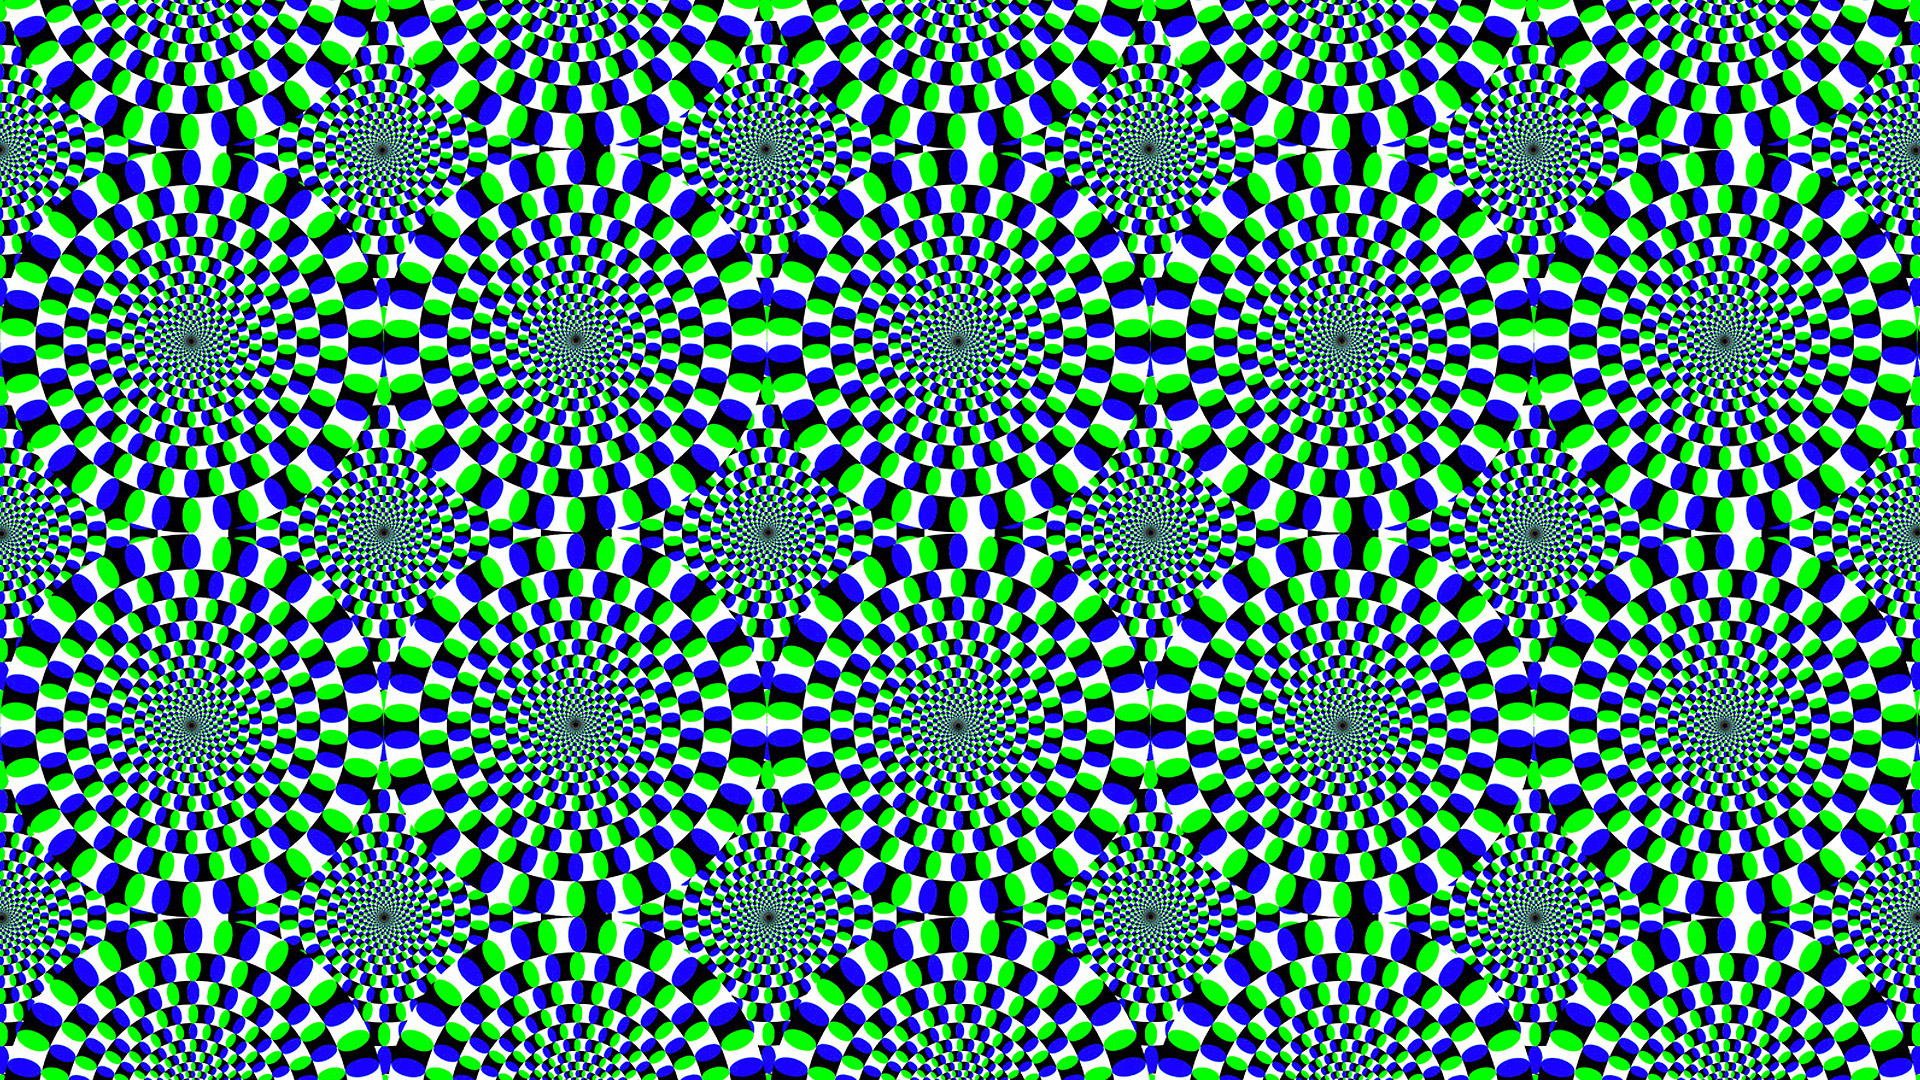 1920x1080 Trippy Optical Illusions That Appear to be Animated (Use as Phone Wallpaper if You Want to go Crazy) &acirc;&#128;&#147; BOOOOOOOM! &acirc;&#128;&#147; CREATE * INSPIRE * COMMUNITY * ART * DESIGN * MUSIC * FILM * PHOTO * PROJECTS